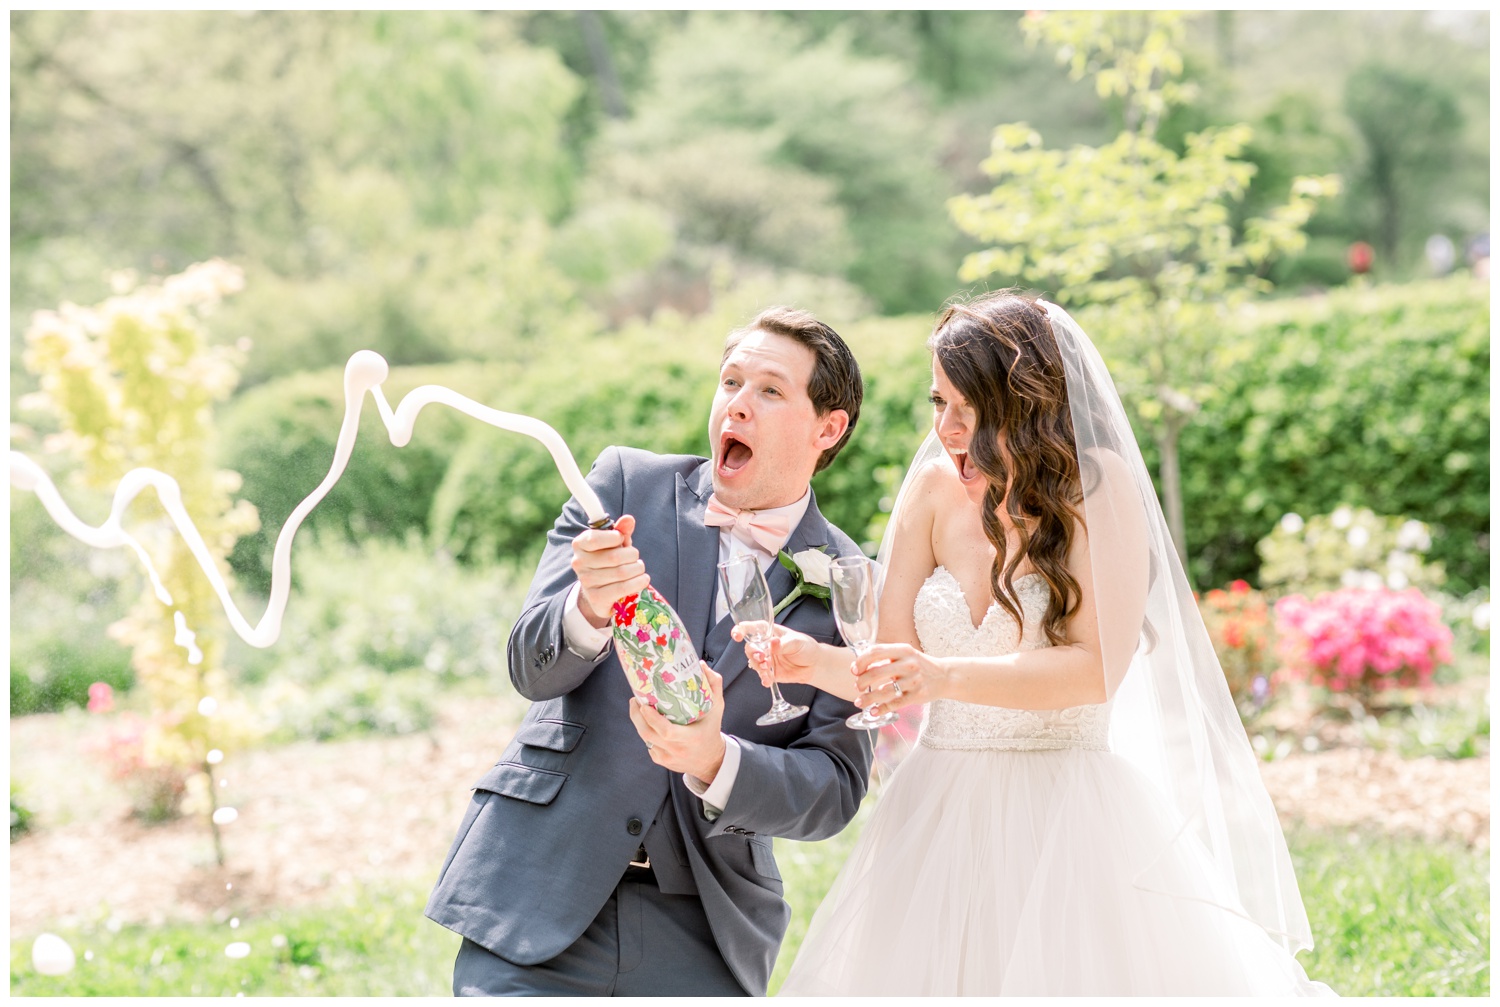 Bride and Groom Popping Champagne at Ault Park - Cincinnati Wedding Photographer